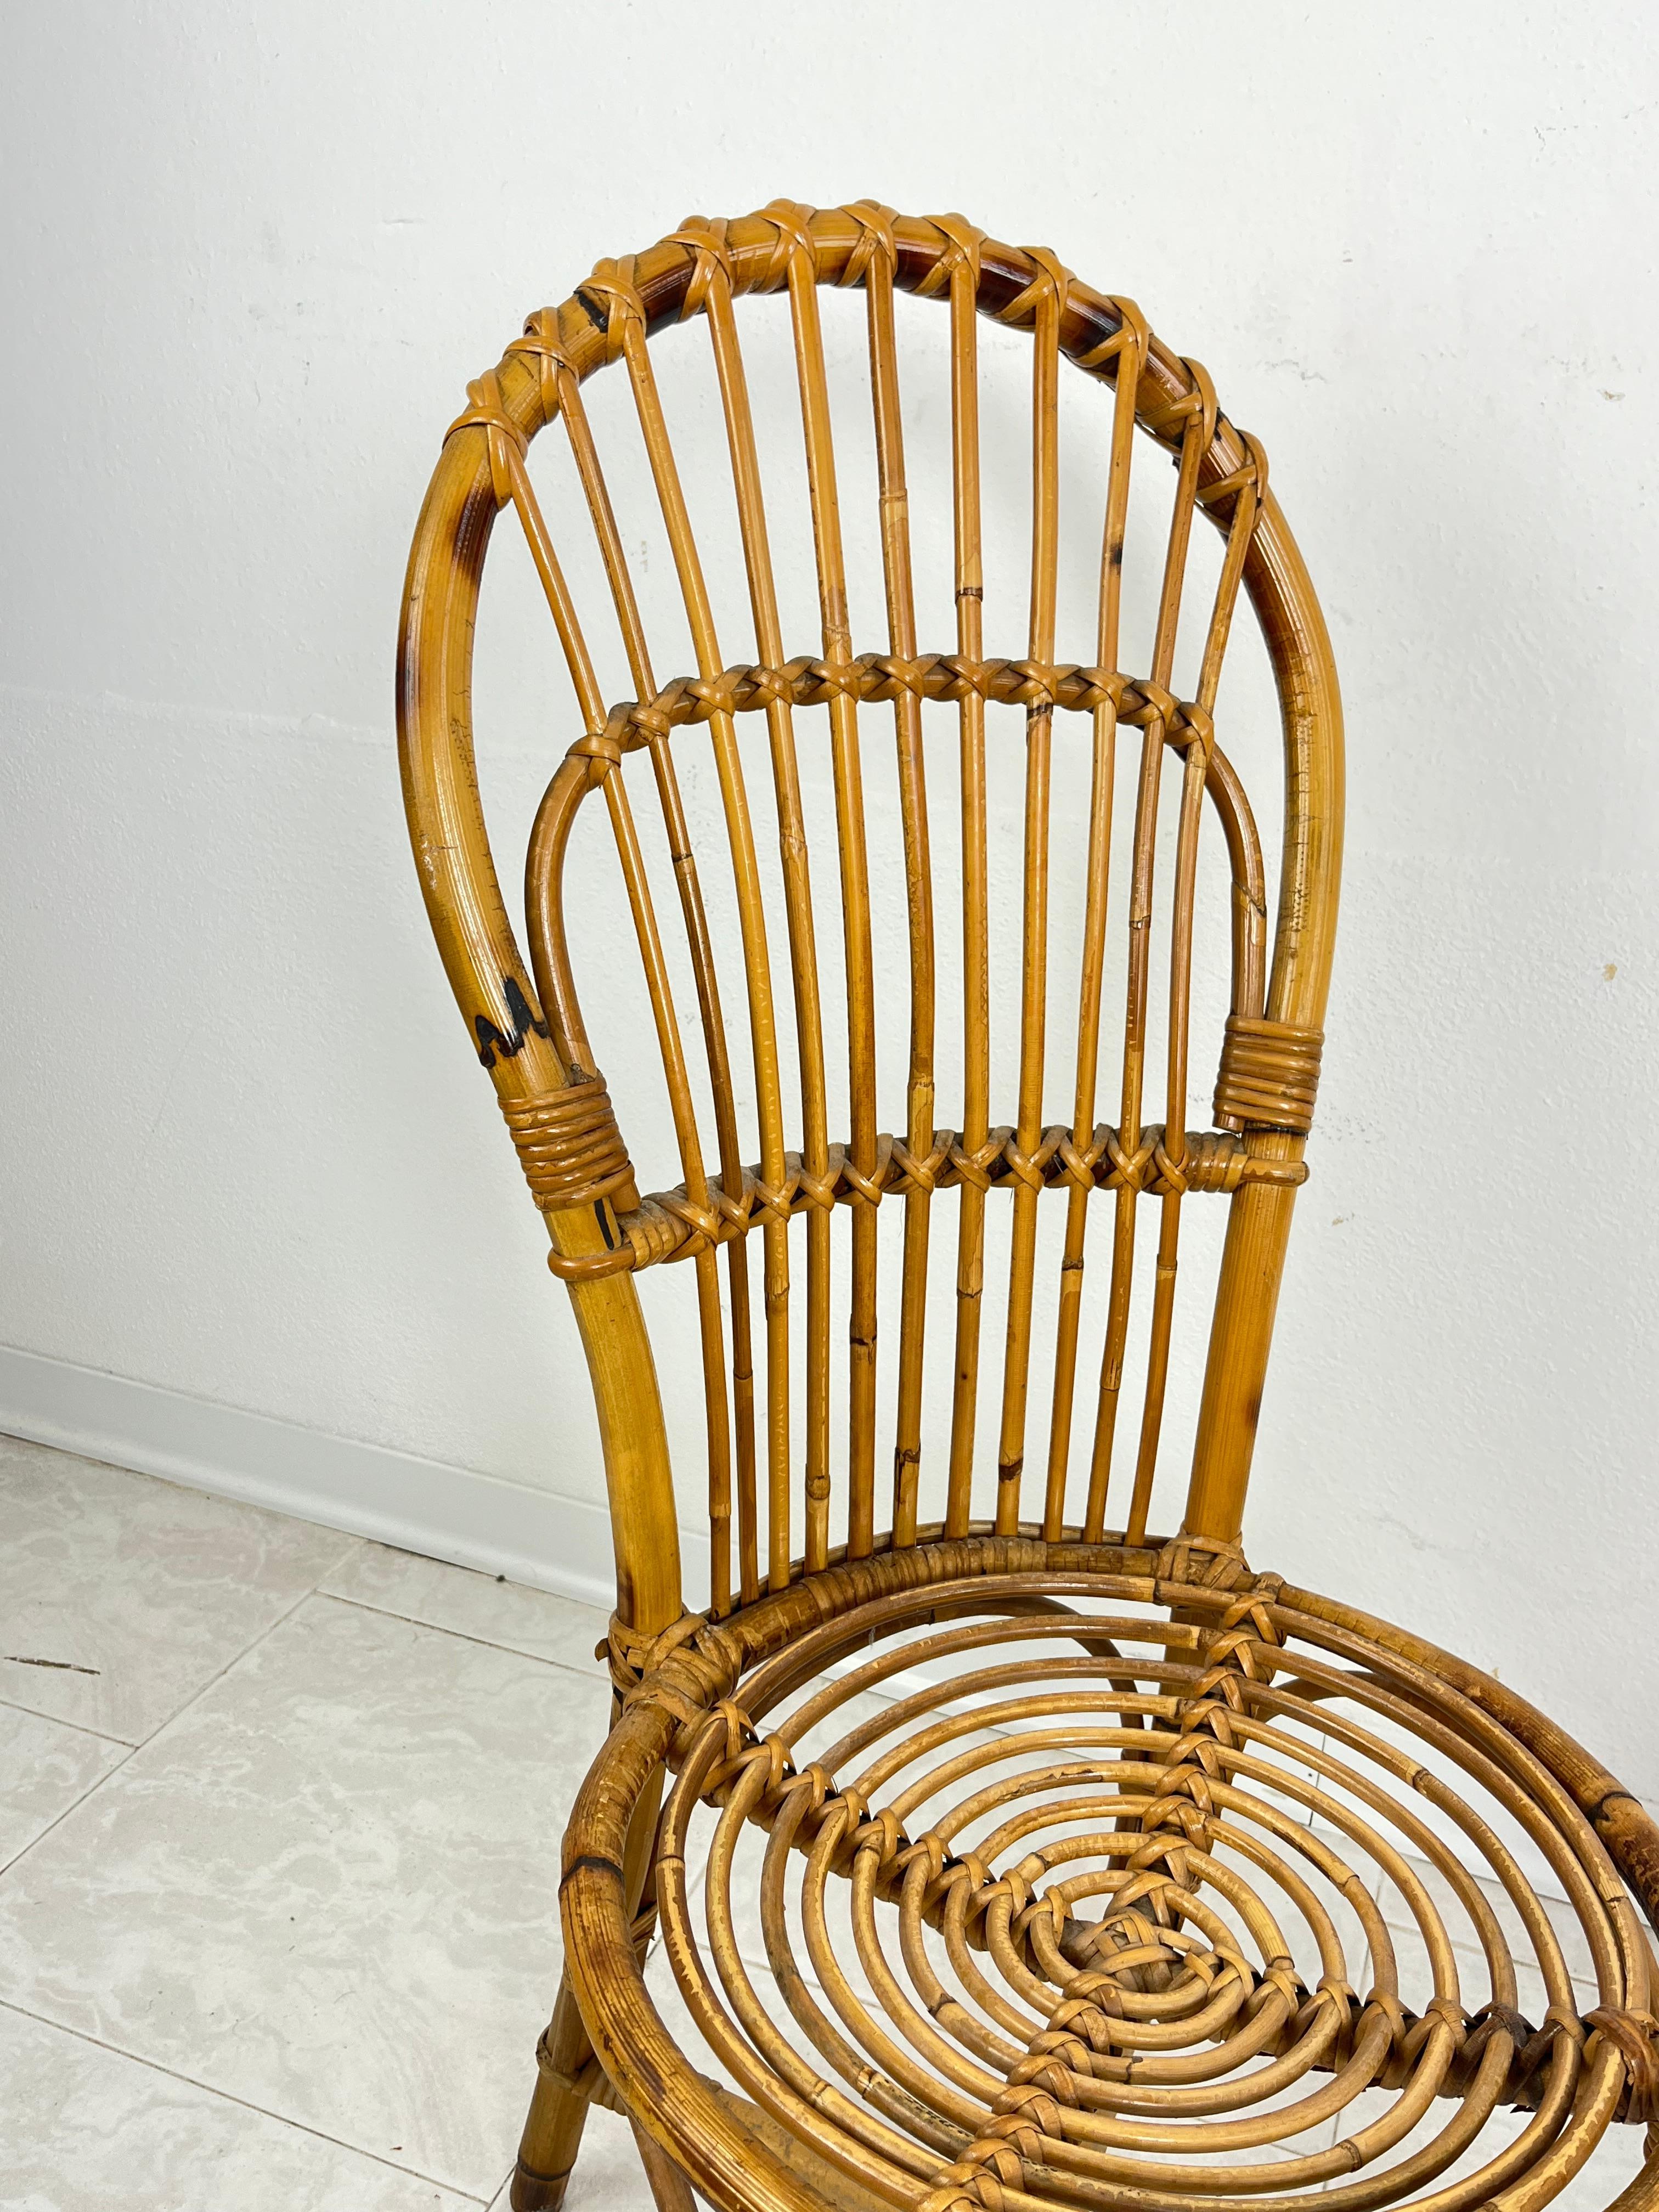 Set of 2 Small Mid-Century Bamboo Chairs, Italian Design 1950s For Sale 5